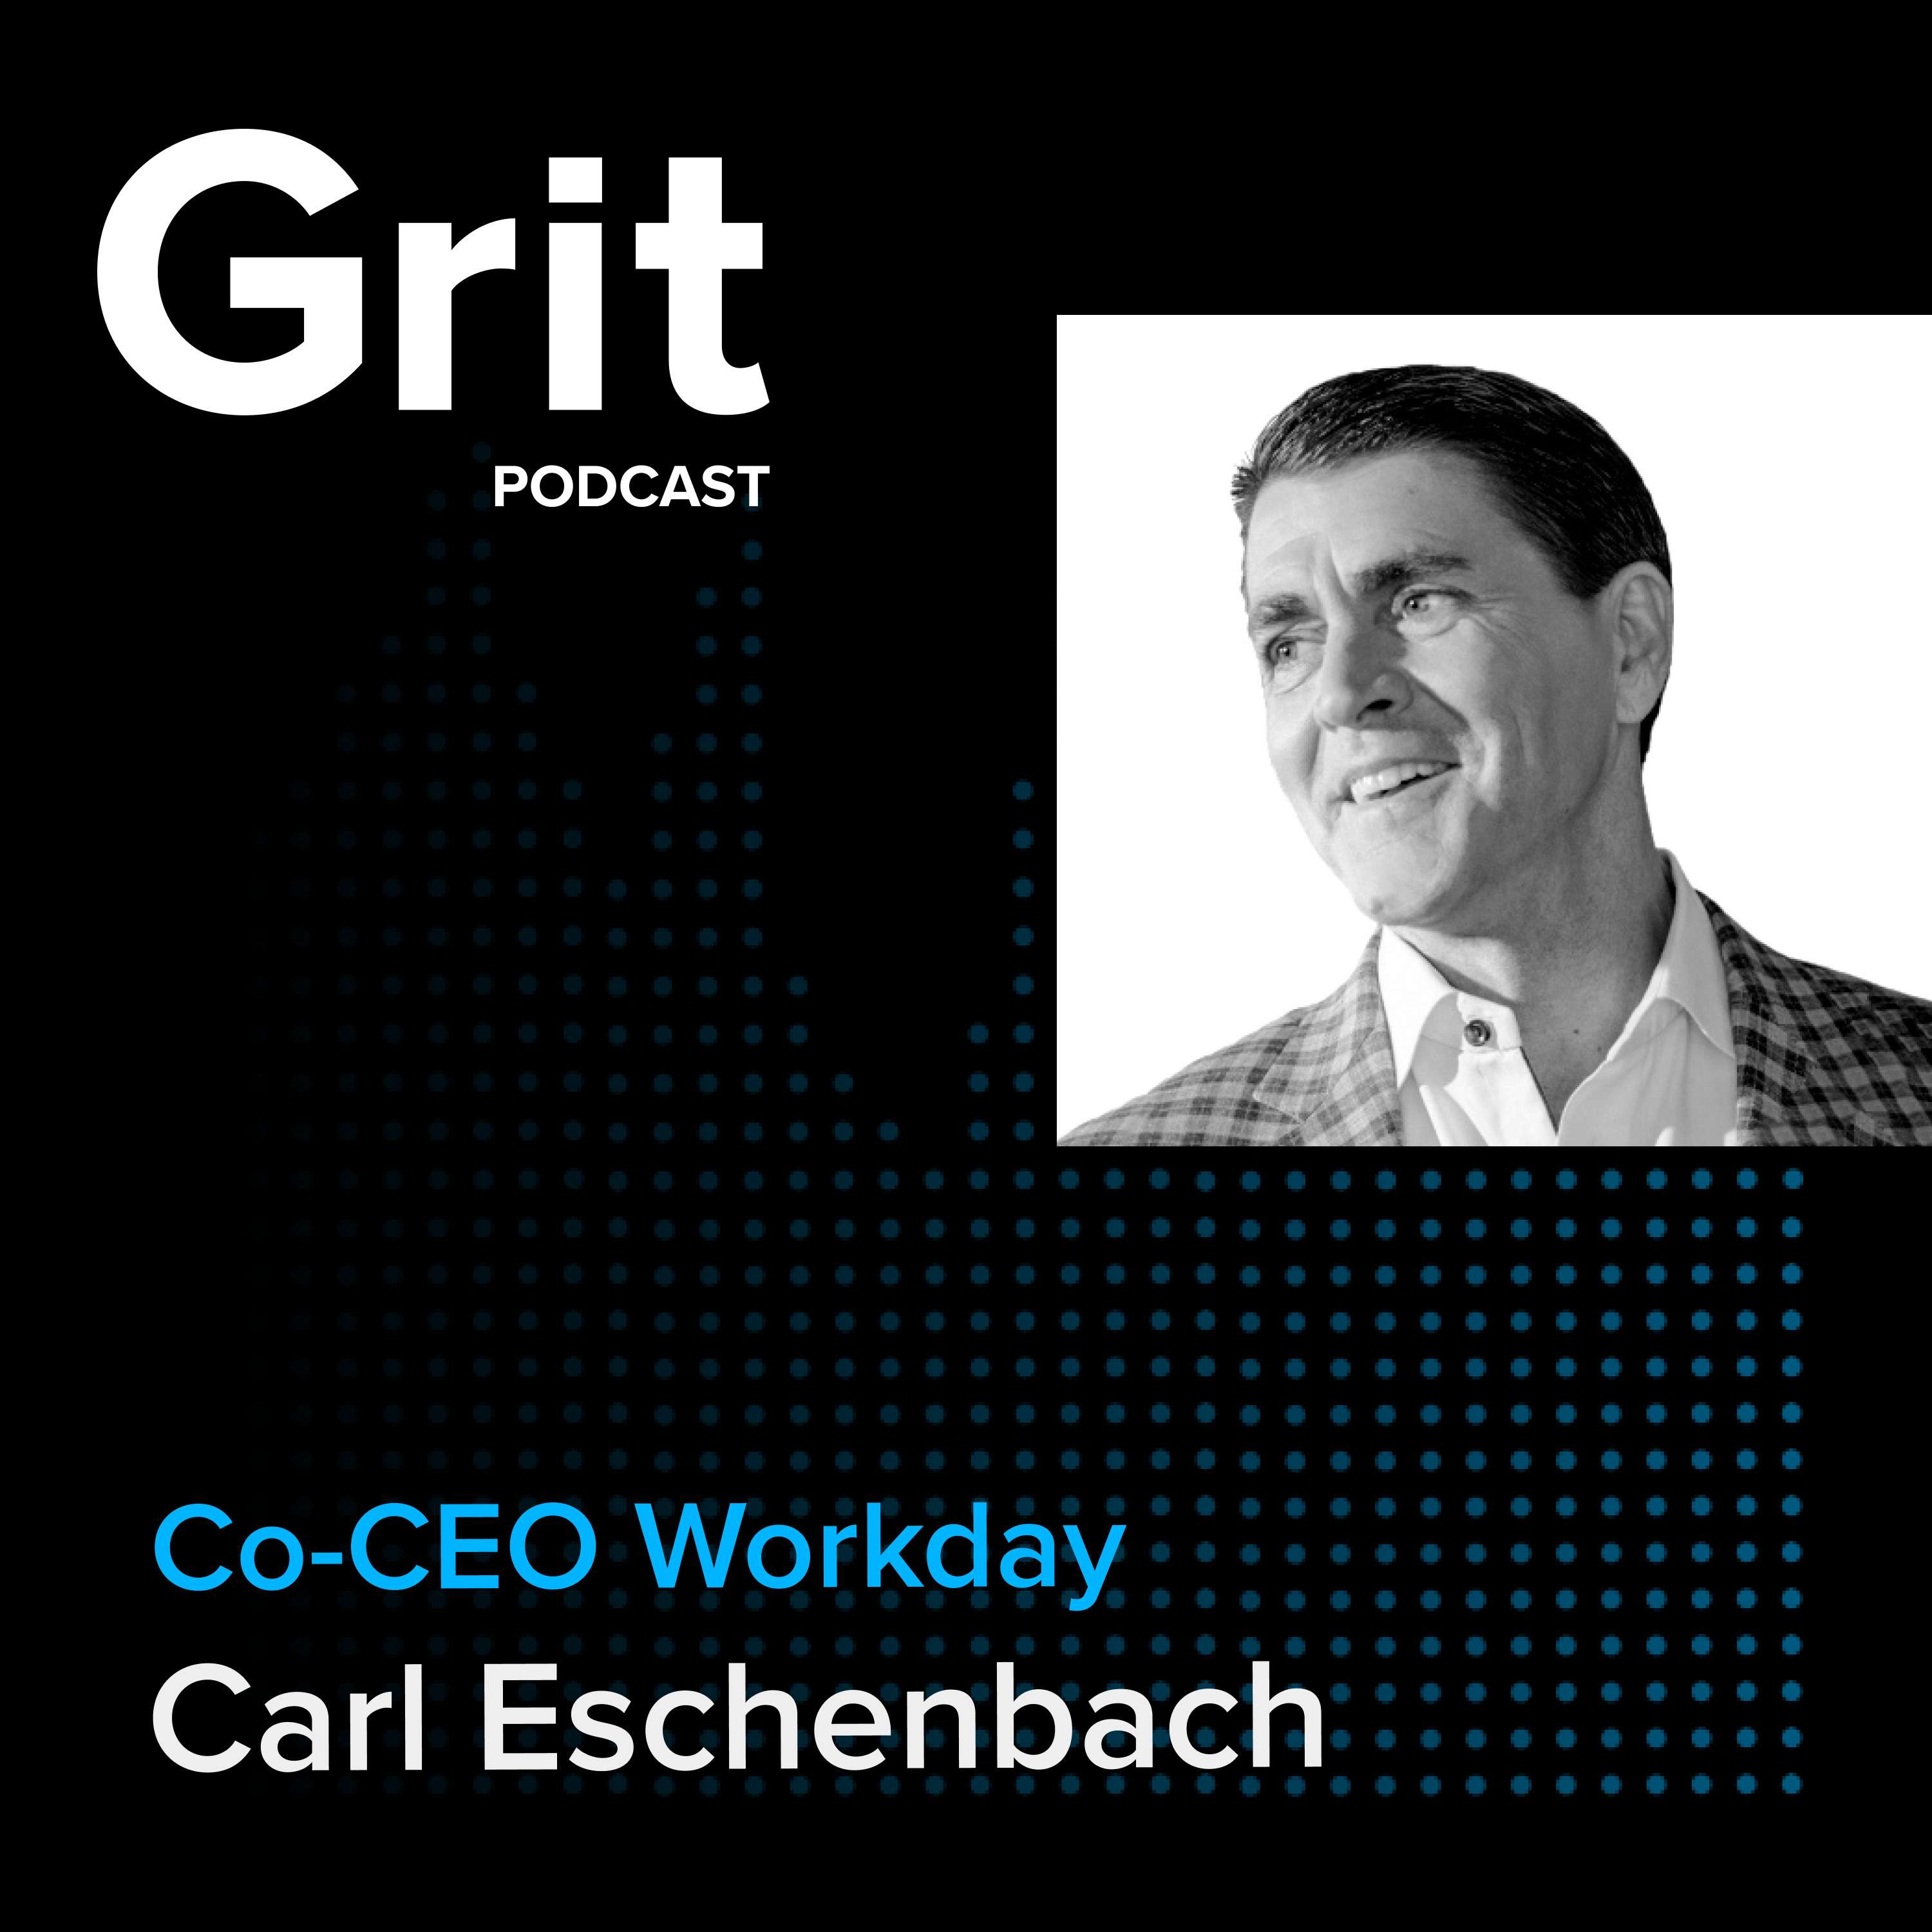 #149 Co-CEO Workday, Carl Eschenbach: A Life of Significance